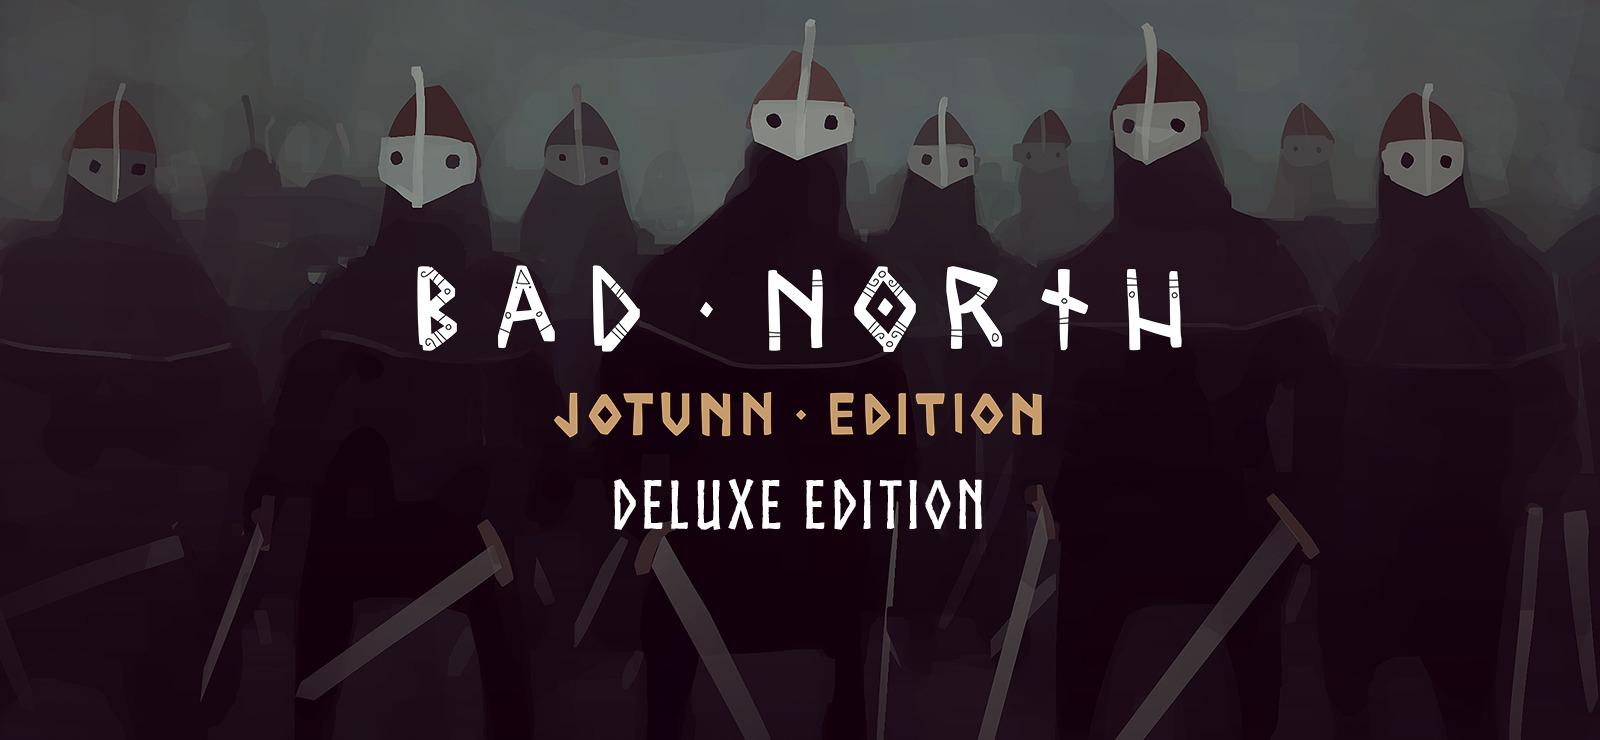 download the new for mac Bad North